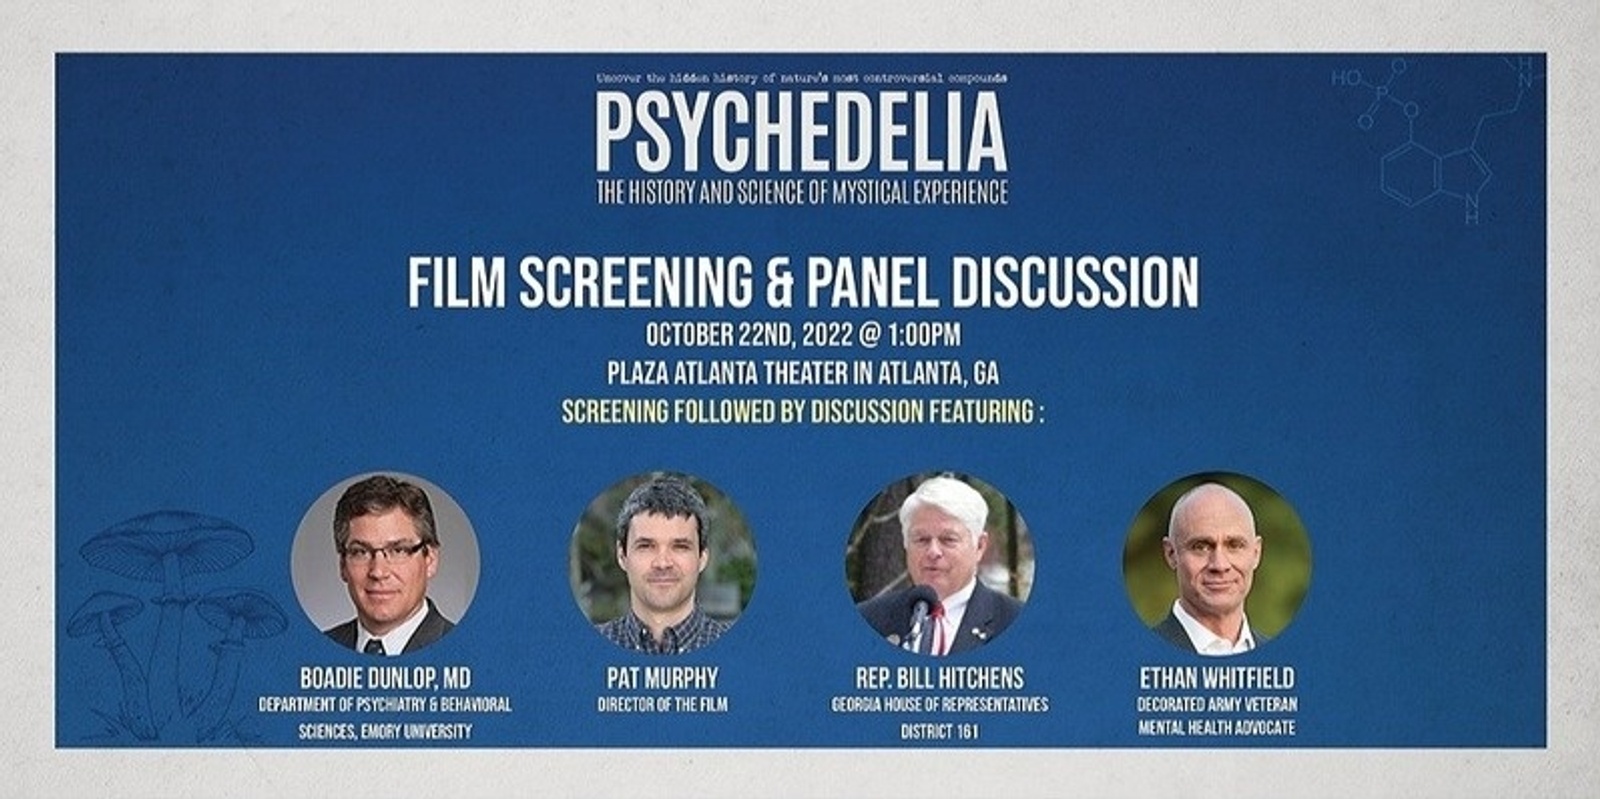 Banner image for "Psychedelia" Screening & Panel Discussion in Atlanta Oct. 22nd